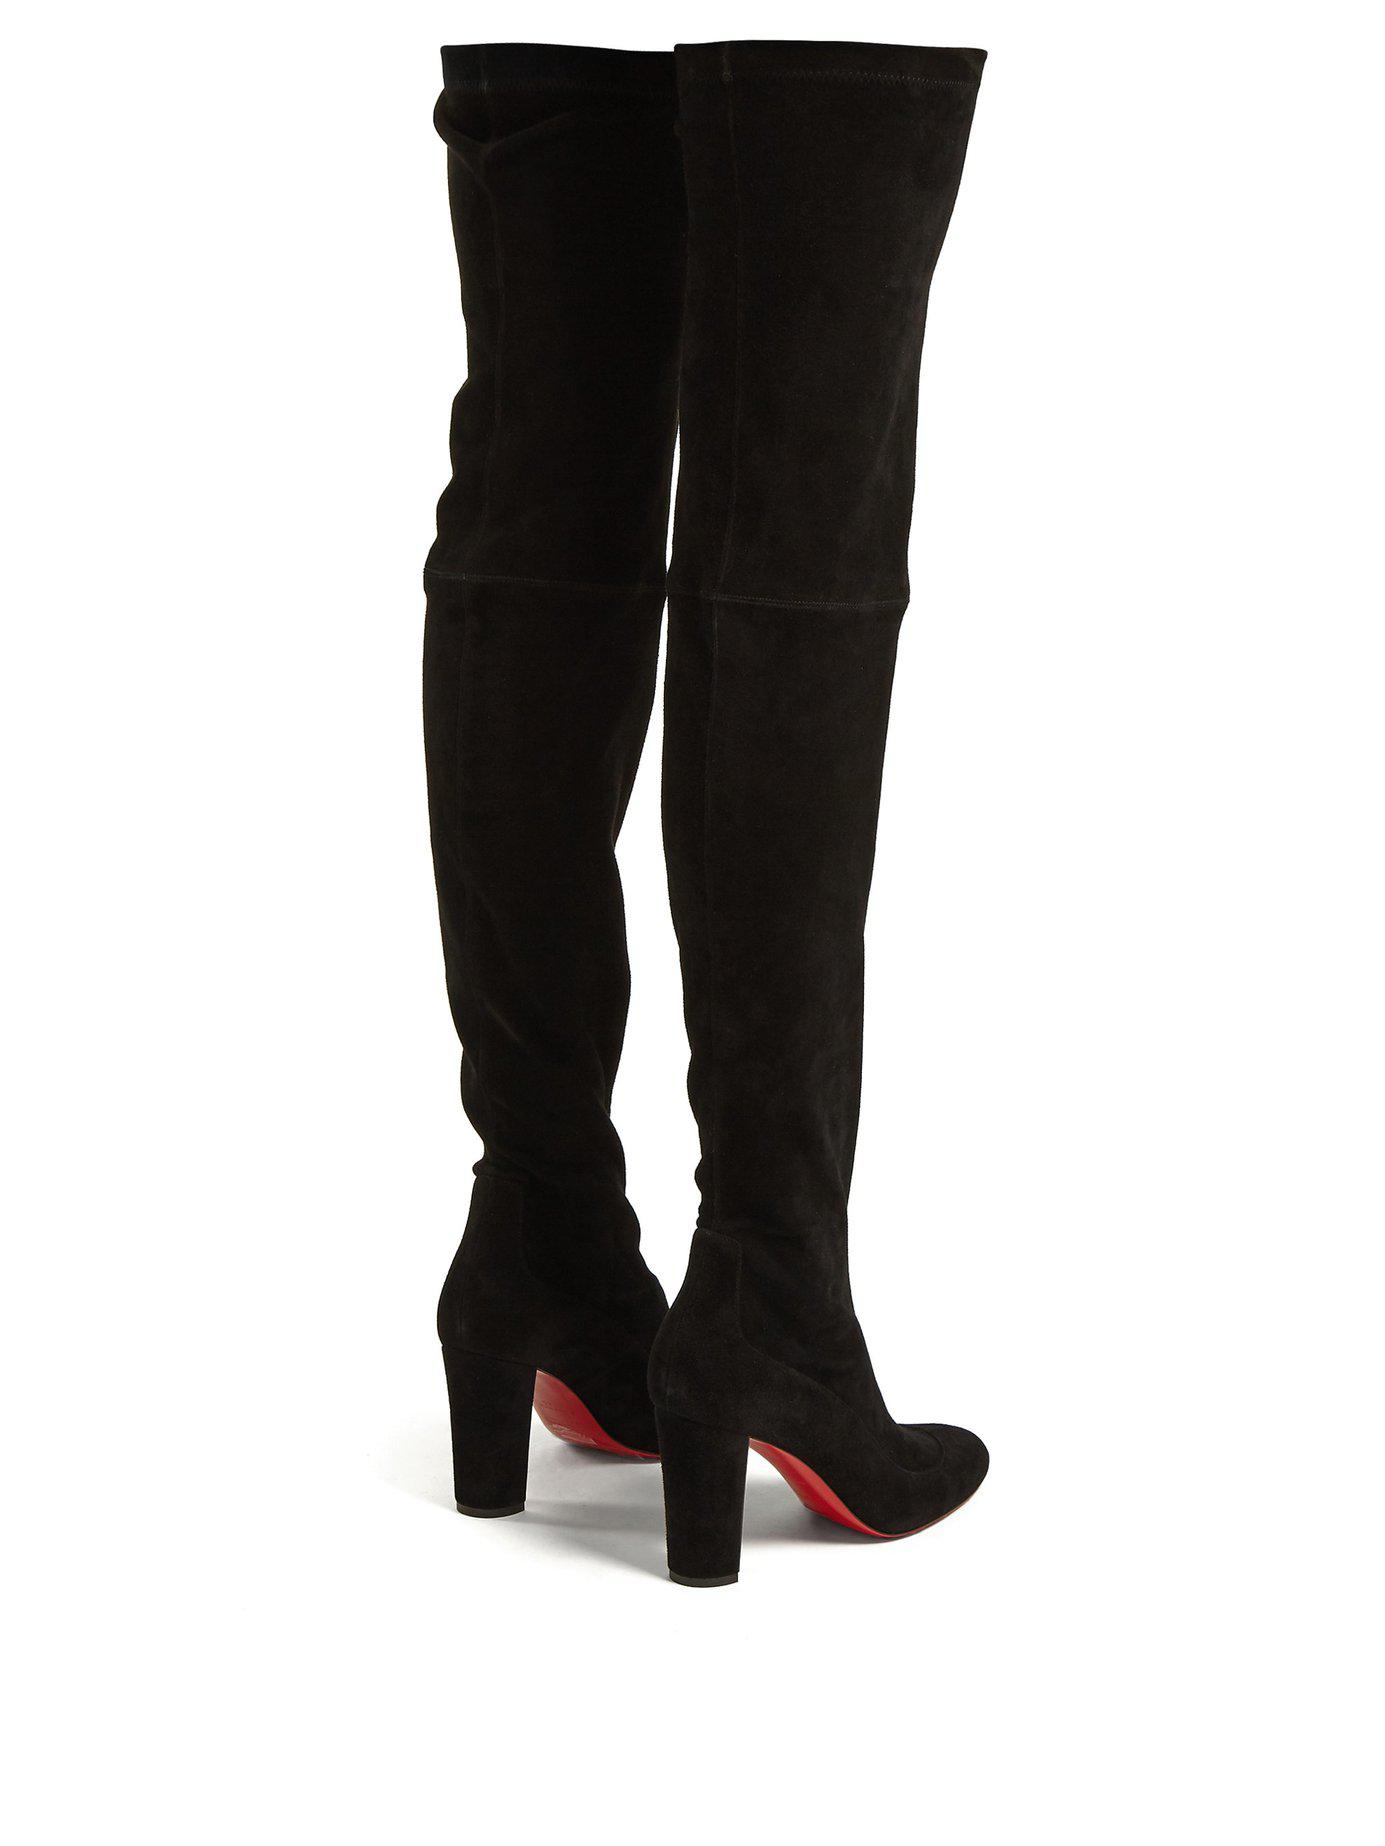 Udvej Diverse energi Christian Louboutin Kiss Me Gina 85 Over The Knee Boots in Black | Lyst